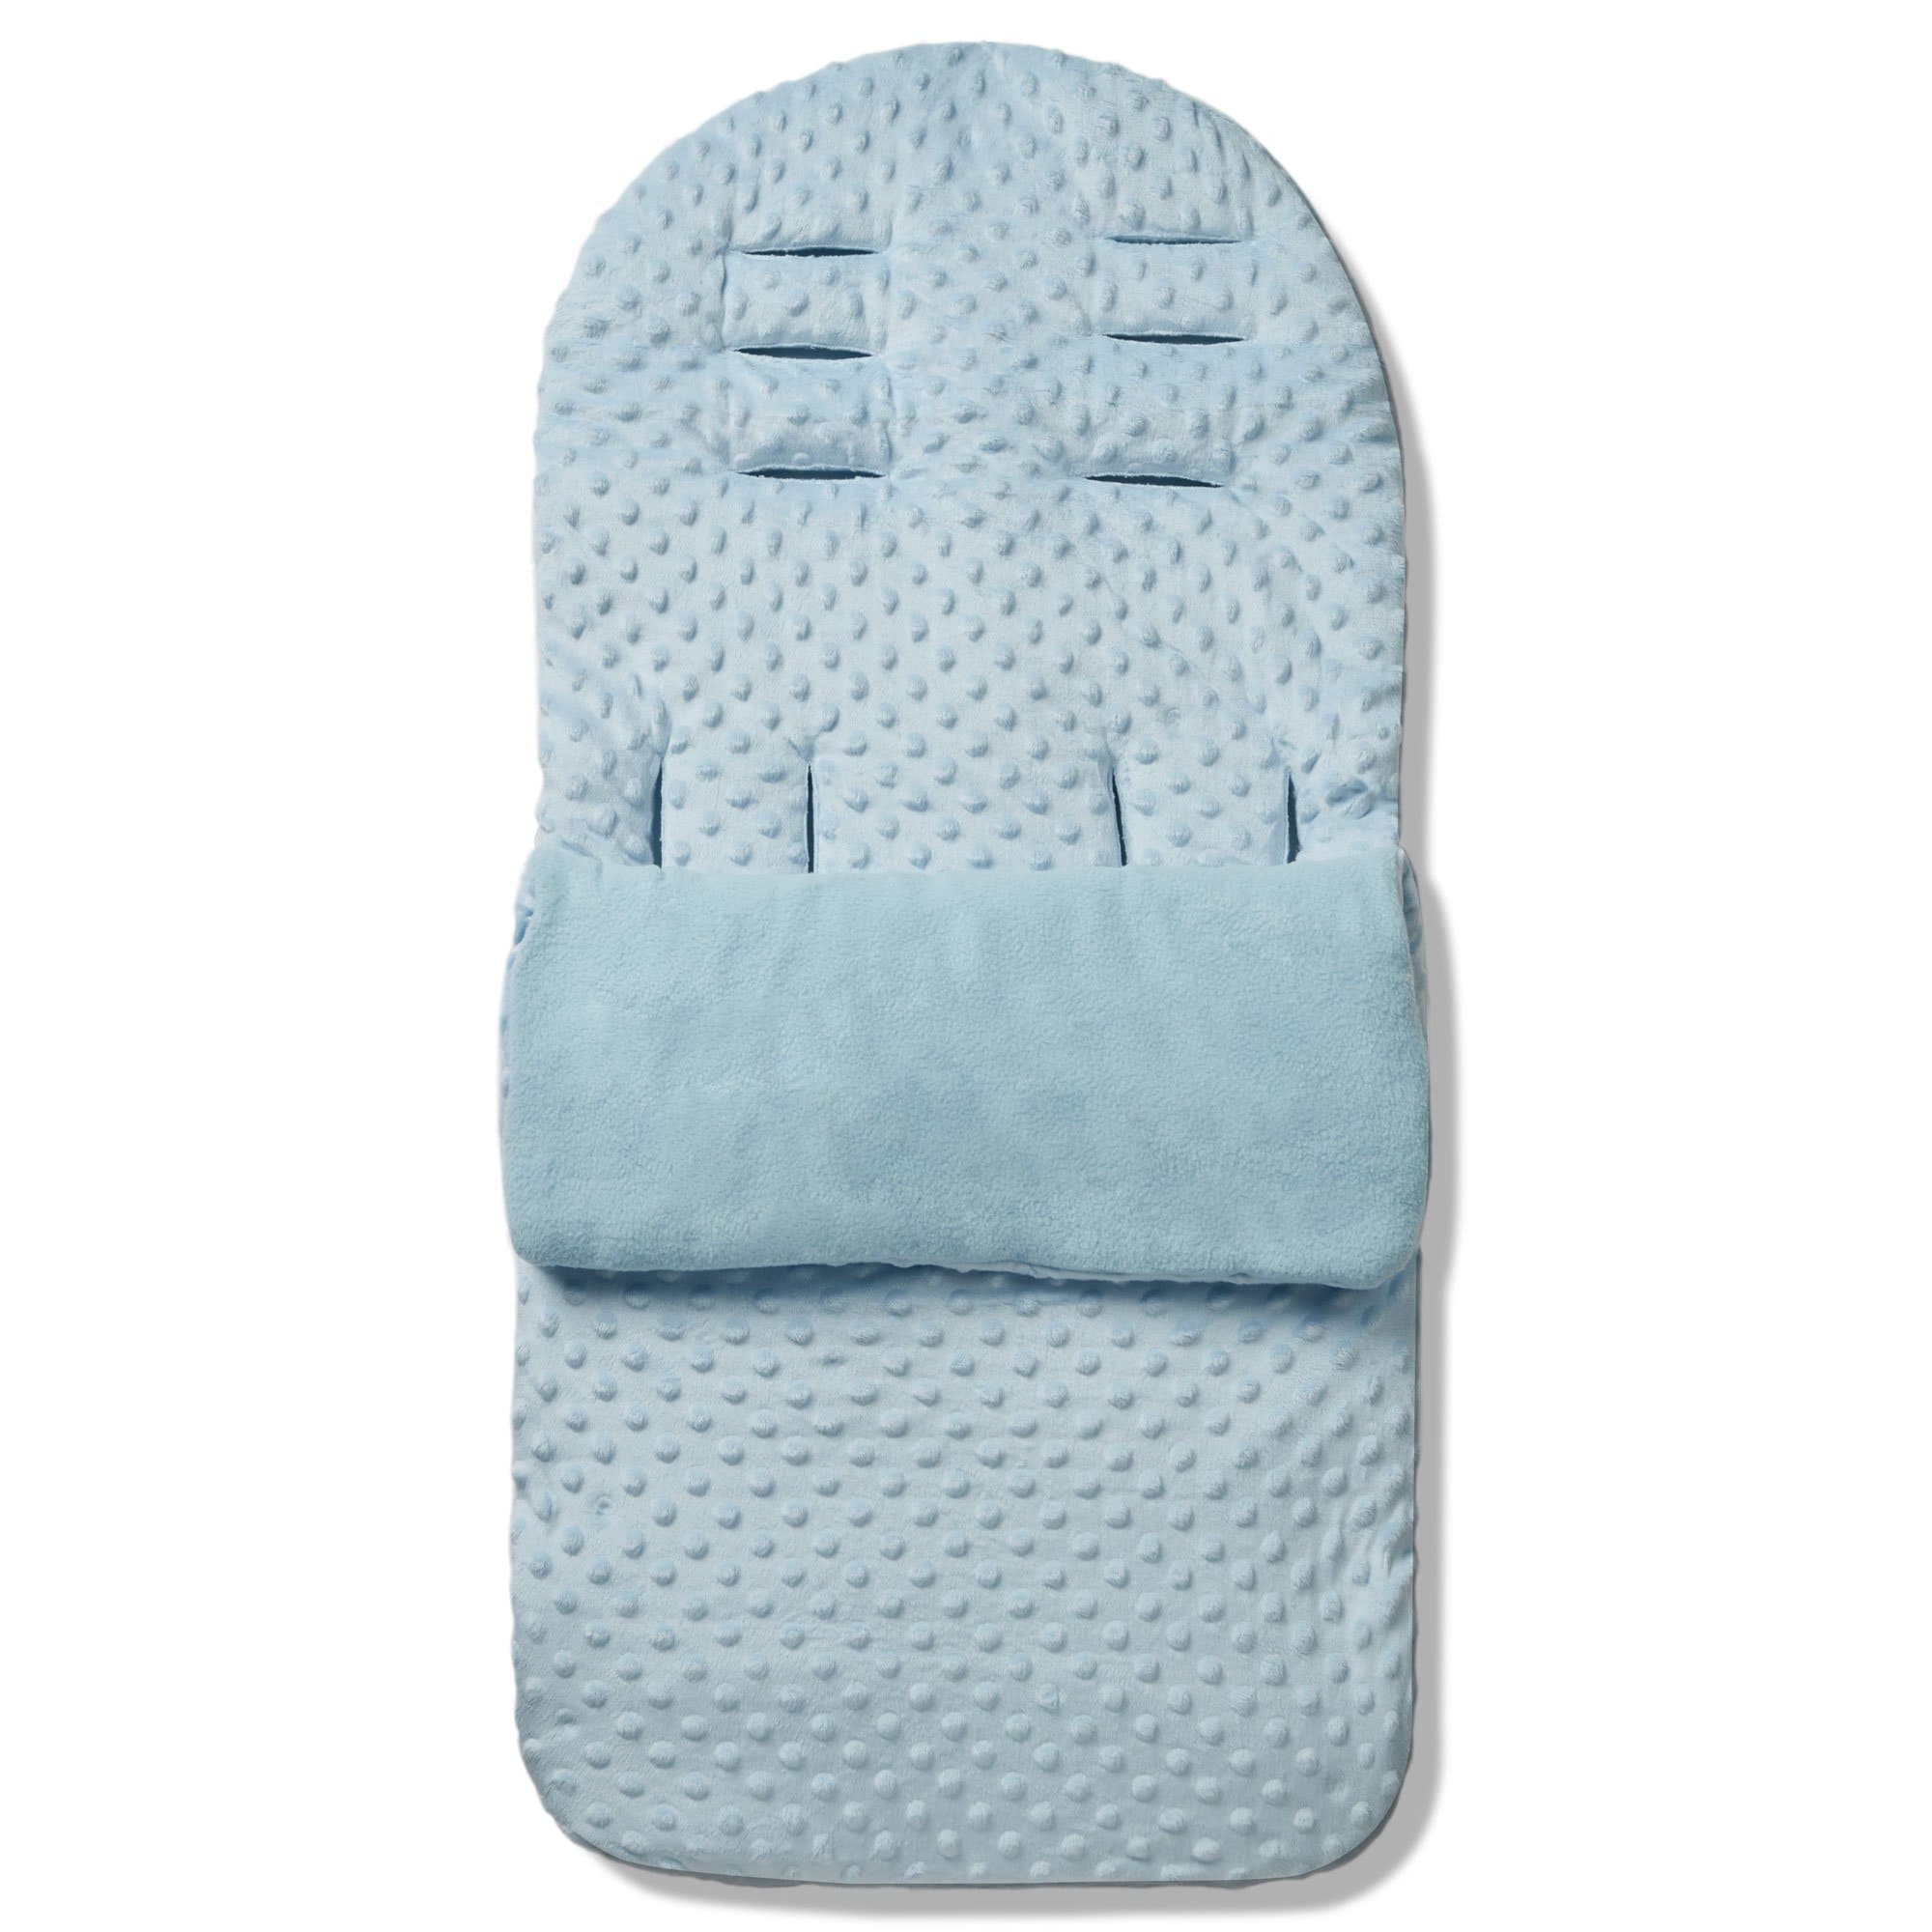 Dimple Footmuff / Cosy Toes Compatible with Peg Perego - Blue / Fits All Models | For Your Little One